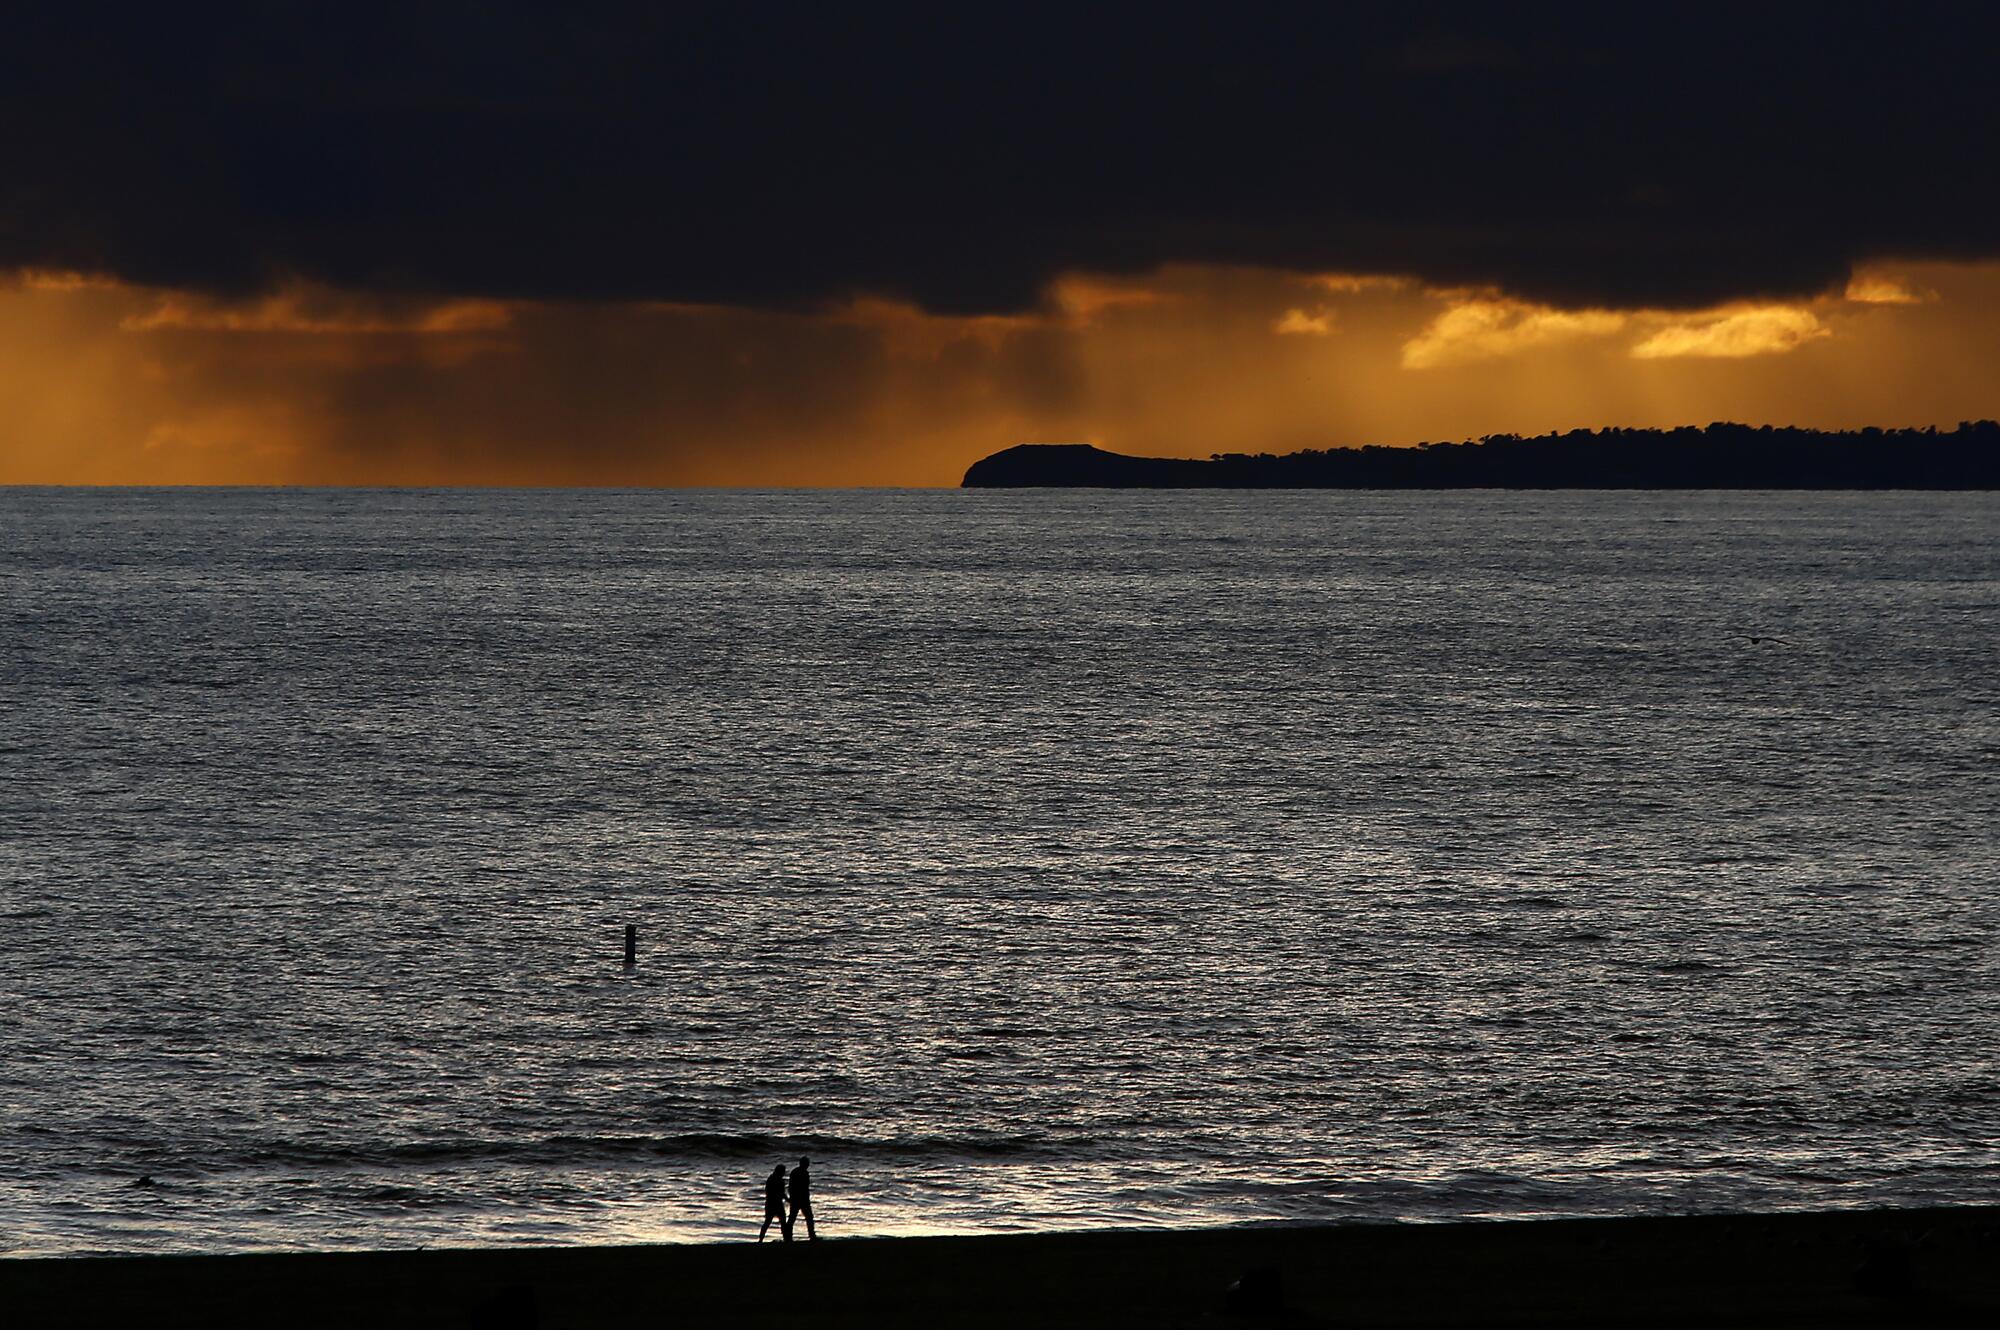 A couple walks alone on Santa Monica Beach as rain falls from storm clouds in the distance.